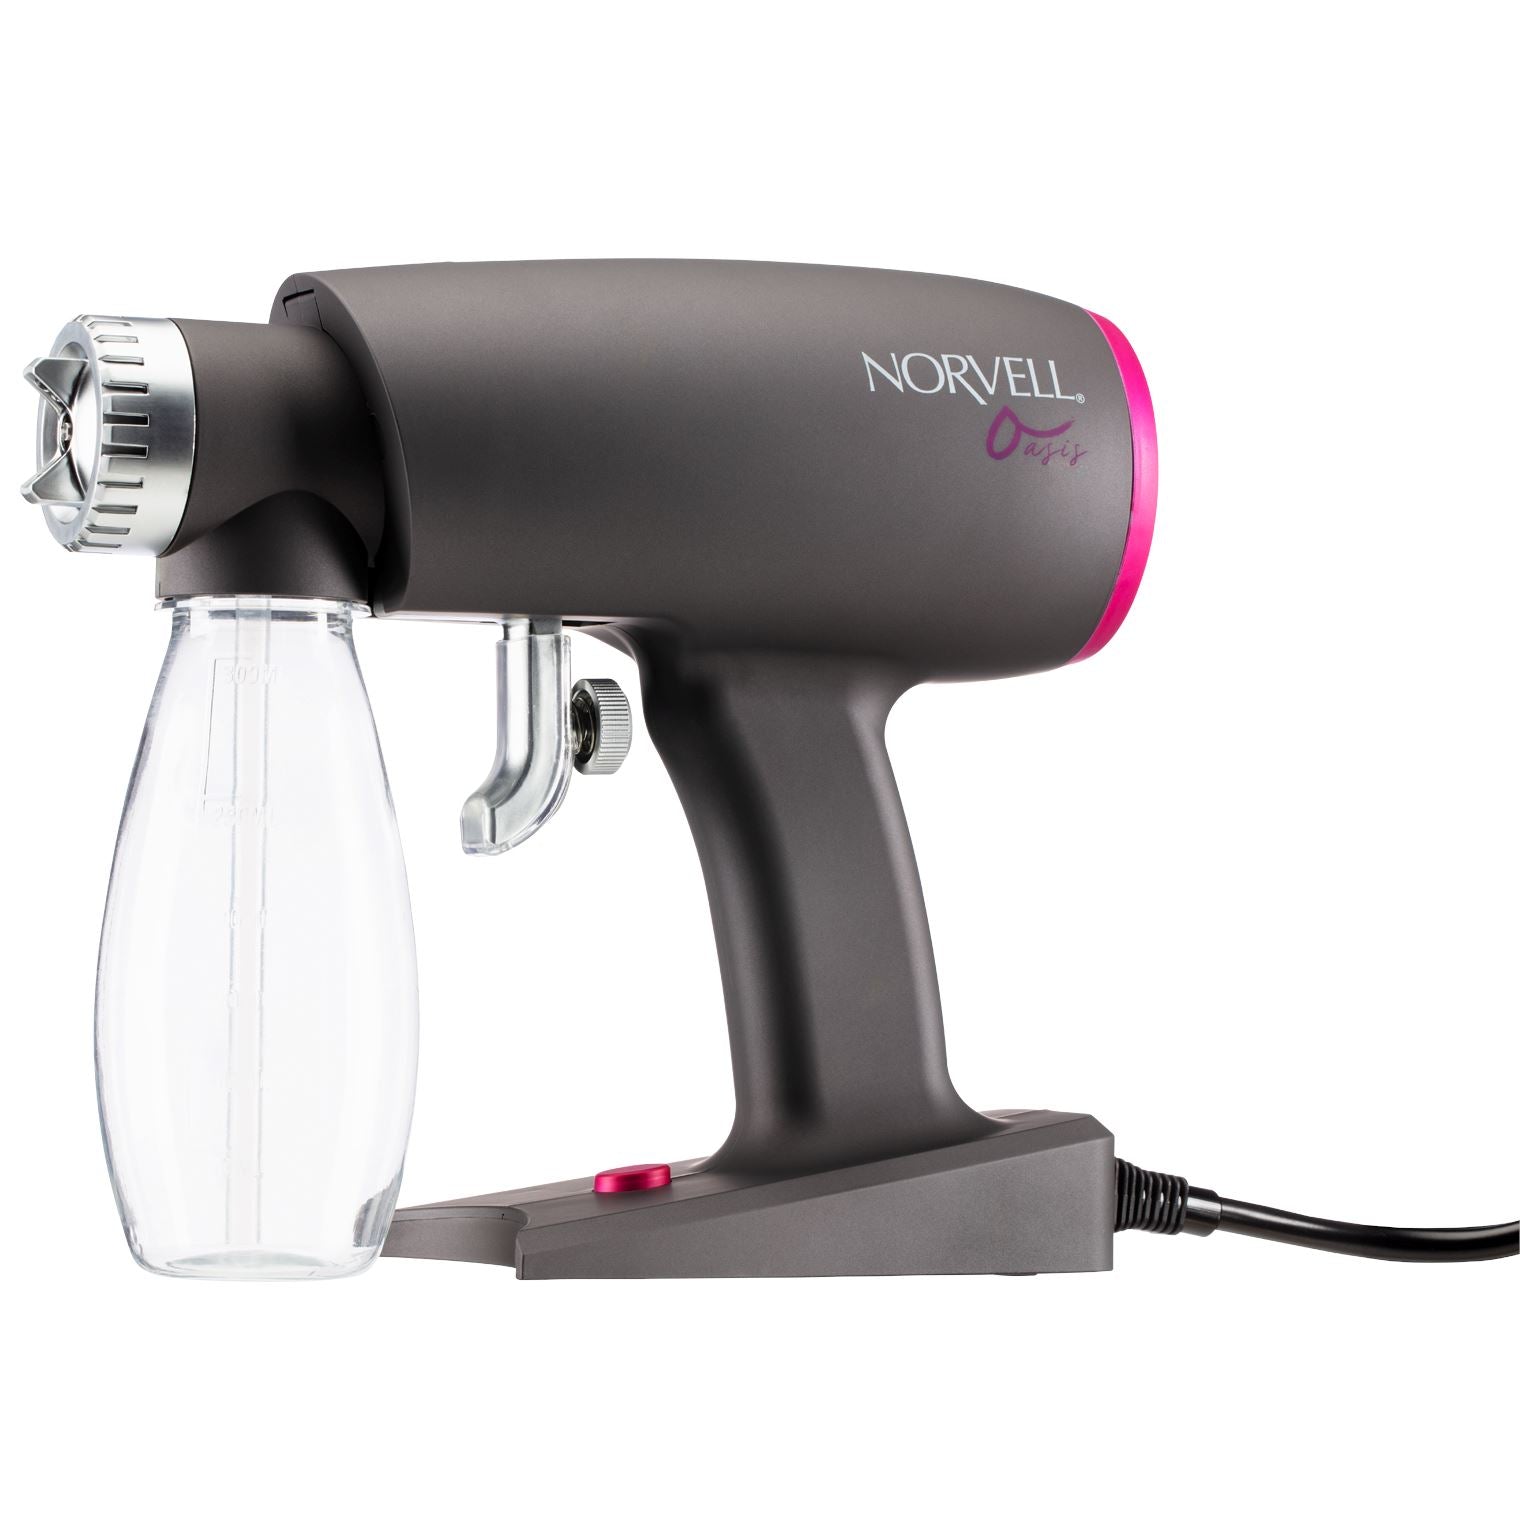 Oasis Portable Spray Tanning Machine | Norvell Tanning Oil & Lotion NORVELL 